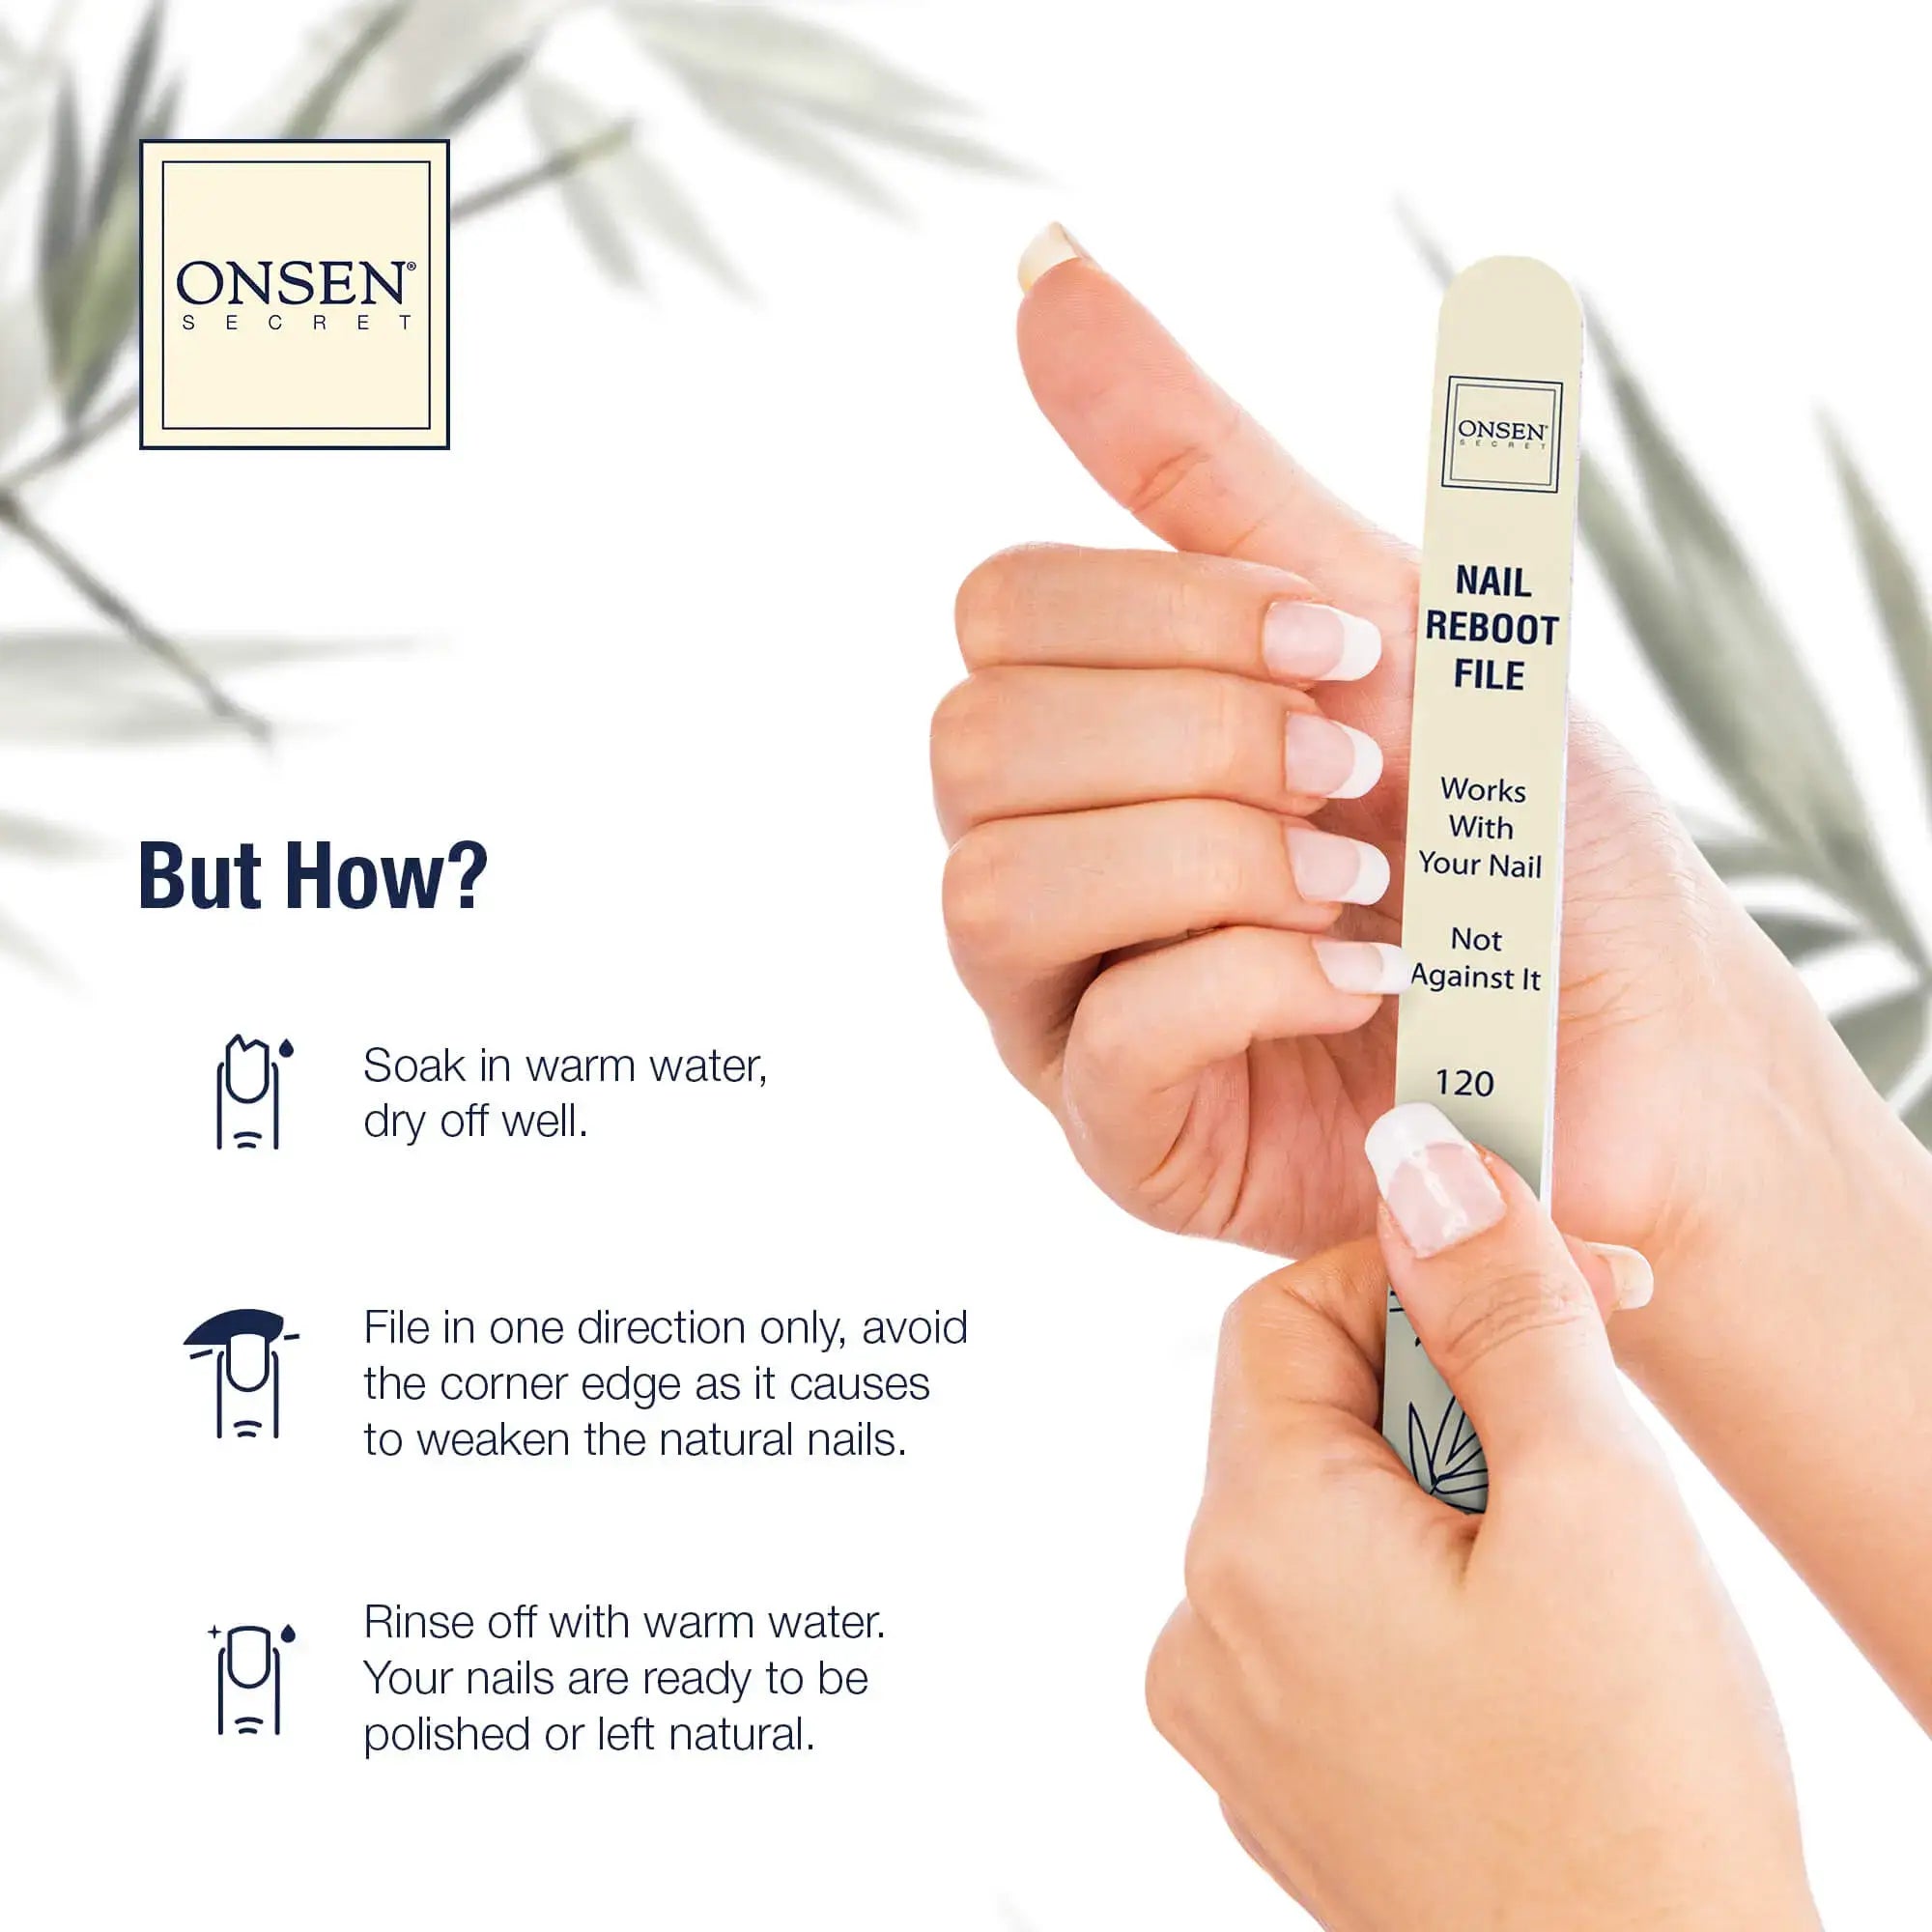 How To Use Electric Nail File - Everything You Need To Know!